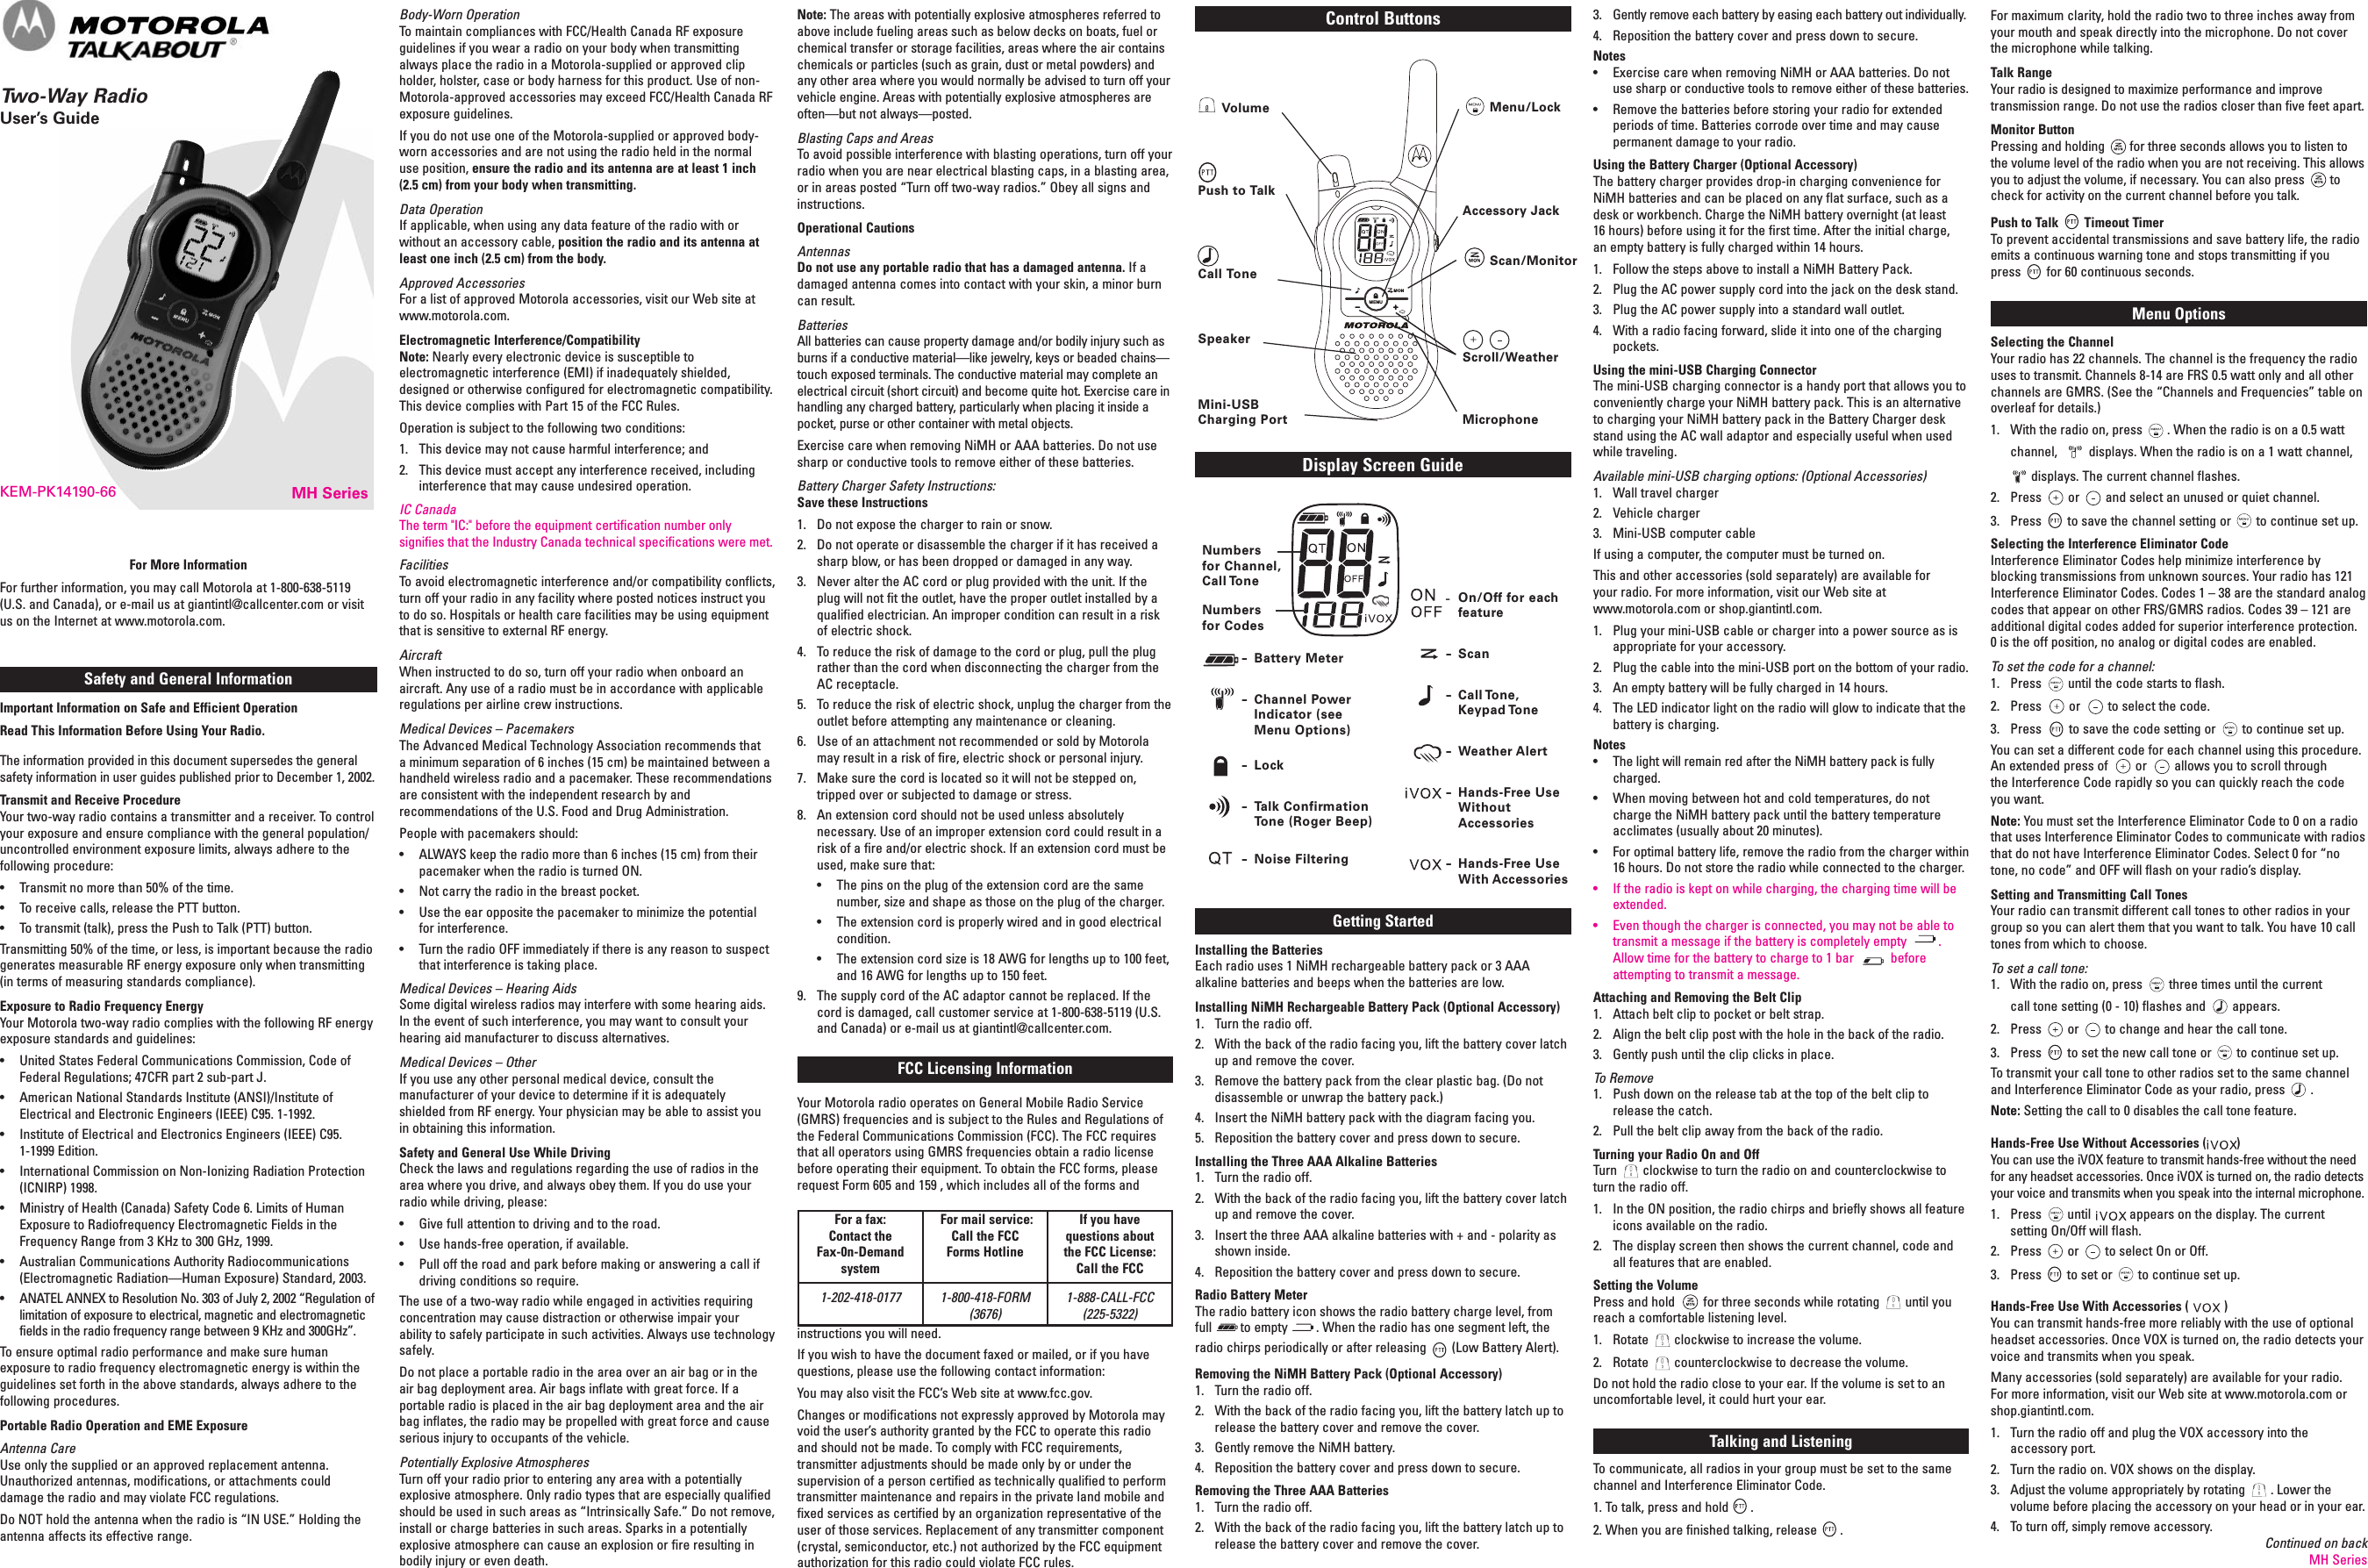 MH SeriesKEM-PK14190-66Safety and General InformationImportant Information on Safe and Efficient OperationRead This Information Before Using Your Radio.The information provided in this document supersedes the generalsafety information in user guides published prior to December 1, 2002.Transmit and Receive ProcedureYour two-way radio contains a transmitter and a receiver. To controlyour exposure and ensure compliance with the general population/uncontrolled environment exposure limits, always adhere to thefollowing procedure:• Transmit no more than 50% of the time.• To receive calls, release the PTT button.• To transmit (talk), press the Push to Talk (PTT) button.Transmitting 50% of the time, or less, is important because the radiogenerates measurable RF energy exposure only when transmitting(in terms of measuring standards compliance).Exposure to Radio Frequency EnergyYour Motorola two-way radio complies with the following RF energyexposure standards and guidelines:• United States Federal Communications Commission, Code ofFederal Regulations; 47CFR part 2 sub-part J.• American National Standards Institute (ANSI)/Institute ofElectrical and Electronic Engineers (IEEE) C95. 1-1992.• Institute of Electrical and Electronics Engineers (IEEE) C95.1-1999 Edition.• International Commission on Non-Ionizing Radiation Protection(ICNIRP) 1998.• Ministry of Health (Canada) Safety Code 6. Limits of HumanExposure to Radiofrequency Electromagnetic Fields in theFrequency Range from 3 KHz to 300 GHz, 1999.• Australian Communications Authority Radiocommunications(Electromagnetic Radiation—Human Exposure) Standard, 2003.• ANATEL ANNEX to Resolution No. 303 of July 2, 2002 “Regulation oflimitation of exposure to electrical, magnetic and electromagneticfields in the radio frequency range between 9 KHz and 300GHz”.To ensure optimal radio performance and make sure humanexposure to radio frequency electromagnetic energy is within theguidelines set forth in the above standards, always adhere to thefollowing procedures.Portable Radio Operation and EME ExposureAntenna CareUse only the supplied or an approved replacement antenna.Unauthorized antennas, modifications, or attachments coulddamage the radio and may violate FCC regulations.Do NOT hold the antenna when the radio is “IN USE.” Holding theantenna affects its effective range.Body-Worn OperationTo maintain compliances with FCC/Health Canada RF exposureguidelines if you wear a radio on your body when transmittingalways place the radio in a Motorola-supplied or approved clipholder, holster, case or body harness for this product. Use of non-Motorola-approved accessories may exceed FCC/Health Canada RFexposure guidelines.If you do not use one of the Motorola-supplied or approved body-worn accessories and are not using the radio held in the normaluse position, ensure the radio and its antenna are at least 1 inch(2.5 cm) from your body when transmitting.Data OperationIf applicable, when using any data feature of the radio with orwithout an accessory cable, position the radio and its antenna atleast one inch (2.5 cm) from the body.Approved AccessoriesFor a list of approved Motorola accessories, visit our Web site atwww.motorola.com.Electromagnetic Interference/CompatibilityNote: Nearly every electronic device is susceptible toelectromagnetic interference (EMI) if inadequately shielded,designed or otherwise configured for electromagnetic compatibility.This device complies with Part 15 of the FCC Rules.Operation is subject to the following two conditions:1. This device may not cause harmful interference; and2. This device must accept any interference received, includinginterference that may cause undesired operation.IC CanadaThe term &quot;IC:&quot; before the equipment certification number onlysignifies that the Industry Canada technical specifications were met.FacilitiesTo avoid electromagnetic interference and/or compatibility conflicts,turn off your radio in any facility where posted notices instruct youto do so. Hospitals or health care facilities may be using equipmentthat is sensitive to external RF energy.AircraftWhen instructed to do so, turn off your radio when onboard anaircraft. Any use of a radio must be in accordance with applicableregulations per airline crew instructions.Medical Devices – PacemakersThe Advanced Medical Technology Association recommends thata minimum separation of 6 inches (15 cm) be maintained between ahandheld wireless radio and a pacemaker. These recommendationsare consistent with the independent research by andrecommendations of the U.S. Food and Drug Administration.People with pacemakers should:• ALWAYS keep the radio more than 6 inches (15 cm) from theirpacemaker when the radio is turned ON.• Not carry the radio in the breast pocket.• Use the ear opposite the pacemaker to minimize the potentialfor interference.• Turn the radio OFF immediately if there is any reason to suspectthat interference is taking place.Medical Devices – Hearing AidsSome digital wireless radios may interfere with some hearing aids.In the event of such interference, you may want to consult yourhearing aid manufacturer to discuss alternatives.Medical Devices – OtherIf you use any other personal medical device, consult themanufacturer of your device to determine if it is adequatelyshielded from RF energy. Your physician may be able to assist youin obtaining this information.Safety and General Use While DrivingCheck the laws and regulations regarding the use of radios in thearea where you drive, and always obey them. If you do use yourradio while driving, please:• Give full attention to driving and to the road.• Use hands-free operation, if available.• Pull off the road and park before making or answering a call ifdriving conditions so require.The use of a two-way radio while engaged in activities requiringconcentration may cause distraction or otherwise impair yourability to safely participate in such activities. Always use technologysafely.Do not place a portable radio in the area over an air bag or in theair bag deployment area. Air bags inflate with great force. If aportable radio is placed in the air bag deployment area and the airbag inflates, the radio may be propelled with great force and causeserious injury to occupants of the vehicle.Potentially Explosive AtmospheresTurn off your radio prior to entering any area with a potentiallyexplosive atmosphere. Only radio types that are especially qualifiedshould be used in such areas as “Intrinsically Safe.” Do not remove,install or charge batteries in such areas. Sparks in a potentiallyexplosive atmosphere can cause an explosion or fire resulting inbodily injury or even death.For More InformationFor further information, you may call Motorola at 1-800-638-5119(U.S. and Canada), or e-mail us at giantintl@callcenter.com or visitus on the Internet at www.motorola.com.Note: The areas with potentially explosive atmospheres referred toabove include fueling areas such as below decks on boats, fuel orchemical transfer or storage facilities, areas where the air containschemicals or particles (such as grain, dust or metal powders) andany other area where you would normally be advised to turn off yourvehicle engine. Areas with potentially explosive atmospheres areoften—but not always—posted.Blasting Caps and AreasTo avoid possible interference with blasting operations, turn off yourradio when you are near electrical blasting caps, in a blasting area,or in areas posted “Turn off two-way radios.” Obey all signs andinstructions.Operational CautionsAntennasDo not use any portable radio that has a damaged antenna. If adamaged antenna comes into contact with your skin, a minor burncan result.BatteriesAll batteries can cause property damage and/or bodily injury such asburns if a conductive material—like jewelry, keys or beaded chains—touch exposed terminals. The conductive material may complete anelectrical circuit (short circuit) and become quite hot. Exercise care inhandling any charged battery, particularly when placing it inside apocket, purse or other container with metal objects.Exercise care when removing NiMH or AAA batteries. Do not usesharp or conductive tools to remove either of these batteries.Battery Charger Safety Instructions:Save these Instructions1. Do not expose the charger to rain or snow.2. Do not operate or disassemble the charger if it has received asharp blow, or has been dropped or damaged in any way.3. Never alter the AC cord or plug provided with the unit. If theplug will not fit the outlet, have the proper outlet installed by aqualified electrician. An improper condition can result in a riskof electric shock.4. To reduce the risk of damage to the cord or plug, pull the plugrather than the cord when disconnecting the charger from theAC receptacle.5. To reduce the risk of electric shock, unplug the charger from theoutlet before attempting any maintenance or cleaning.6. Use of an attachment not recommended or sold by Motorolamay result in a risk of fire, electric shock or personal injury.7. Make sure the cord is located so it will not be stepped on,tripped over or subjected to damage or stress.8. An extension cord should not be used unless absolutelynecessary. Use of an improper extension cord could result in arisk of a fire and/or electric shock. If an extension cord must beused, make sure that:• The pins on the plug of the extension cord are the samenumber, size and shape as those on the plug of the charger.• The extension cord is properly wired and in good electricalcondition.• The extension cord size is 18 AWG for lengths up to 100 feet,and 16 AWG for lengths up to 150 feet.9. The supply cord of the AC adaptor cannot be replaced. If thecord is damaged, call customer service at 1-800-638-5119 (U.S.and Canada) or e-mail us at giantintl@callcenter.com.FCC Licensing InformationYour Motorola radio operates on General Mobile Radio Service(GMRS) frequencies and is subject to the Rules and Regulations ofthe Federal Communications Commission (FCC). The FCC requiresthat all operators using GMRS frequencies obtain a radio licensebefore operating their equipment. To obtain the FCC forms, pleaserequest Form 605 and 159 , which includes all of the forms andinstructions you will need.If you wish to have the document faxed or mailed, or if you havequestions, please use the following contact information:You may also visit the FCC’s Web site at www.fcc.gov.Changes or modifications not expressly approved by Motorola mayvoid the user’s authority granted by the FCC to operate this radioand should not be made. To comply with FCC requirements,transmitter adjustments should be made only by or under thesupervision of a person certified as technically qualified to performtransmitter maintenance and repairs in the private land mobile andfixed services as certified by an organization representative of theuser of those services. Replacement of any transmitter component(crystal, semiconductor, etc.) not authorized by the FCC equipmentauthorization for this radio could violate FCC rules.®3. Gently remove each battery by easing each battery out individually.4. Reposition the battery cover and press down to secure.Notes• Exercise care when removing NiMH or AAA batteries. Do notuse sharp or conductive tools to remove either of these batteries.• Remove the batteries before storing your radio for extendedperiods of time. Batteries corrode over time and may causepermanent damage to your radio.Using the Battery Charger (Optional Accessory)The battery charger provides drop-in charging convenience forNiMH batteries and can be placed on any flat surface, such as adesk or workbench. Charge the NiMH battery overnight (at least16 hours) before using it for the first time. After the initial charge,an empty battery is fully charged within 14 hours.1. Follow the steps above to install a NiMH Battery Pack.2. Plug the AC power supply cord into the jack on the desk stand.3. Plug the AC power supply into a standard wall outlet.4. With a radio facing forward, slide it into one of the chargingpockets.Using the mini-USB Charging ConnectorThe mini-USB charging connector is a handy port that allows you toconveniently charge your NiMH battery pack. This is an alternativeto charging your NiMH battery pack in the Battery Charger deskstand using the AC wall adaptor and especially useful when usedwhile traveling.Available mini-USB charging options: (Optional Accessories)1. Wall travel charger2. Vehicle charger3. Mini-USB computer cableIf using a computer, the computer must be turned on.This and other accessories (sold separately) are available foryour radio. For more information, visit our Web site atwww.motorola.com or shop.giantintl.com.1. Plug your mini-USB cable or charger into a power source as isappropriate for your accessory.2. Plug the cable into the mini-USB port on the bottom of your radio.3. An empty battery will be fully charged in 14 hours.4. The LED indicator light on the radio will glow to indicate that thebattery is charging.Notes• The light will remain red after the NiMH battery pack is fullycharged.• When moving between hot and cold temperatures, do notcharge the NiMH battery pack until the battery temperatureacclimates (usually about 20 minutes).• For optimal battery life, remove the radio from the charger within16 hours. Do not store the radio while connected to the charger.• If the radio is kept on while charging, the charging time will beextended.• Even though the charger is connected, you may not be able totransmit a message if the battery is completely empty .Allow time for the battery to charge to 1 bar beforeattempting to transmit a message.Attaching and Removing the Belt Clip1. Attach belt clip to pocket or belt strap.2. Align the belt clip post with the hole in the back of the radio.3. Gently push until the clip clicks in place.To Remove1. Push down on the release tab at the top of the belt clip torelease the catch.2. Pull the belt clip away from the back of the radio.Turning your Radio On and OffTurn clockwise to turn the radio on and counterclockwise toturn the radio off.1. In the ON position, the radio chirps and briefly shows all featureicons available on the radio.2. The display screen then shows the current channel, code andall features that are enabled.Setting the VolumePress and hold for three seconds while rotating until youreach a comfortable listening level.1. Rotate clockwise to increase the volume.2. Rotate counterclockwise to decrease the volume.Do not hold the radio close to your ear. If the volume is set to anuncomfortable level, it could hurt your ear.Talking and ListeningTo communicate, all radios in your group must be set to the samechannel and Interference Eliminator Code.1. To talk, press and hold .2. When you are finished talking, release .For maximum clarity, hold the radio two to three inches away fromyour mouth and speak directly into the microphone. Do not coverthe microphone while talking.Talk RangeYour radio is designed to maximize performance and improvetransmission range. Do not use the radios closer than five feet apart.Monitor ButtonPressing and holding for three seconds allows you to listen tothe volume level of the radio when you are not receiving. This allowsyou to adjust the volume, if necessary. You can also press tocheck for activity on the current channel before you talk.Push to Talk Timeout TimerTo prevent accidental transmissions and save battery life, the radioemits a continuous warning tone and stops transmitting if youpress for 60 continuous seconds.Menu OptionsSelecting the ChannelYour radio has 22 channels. The channel is the frequency the radiouses to transmit. Channels 8-14 are FRS 0.5 watt only and all otherchannels are GMRS. (See the “Channels and Frequencies” table onoverleaf for details.)1. With the radio on, press . When the radio is on a 0.5 wattchannel, displays. When the radio is on a 1 watt channel,displays. The current channel flashes.2. Press or and select an unused or quiet channel.3. Press to save the channel setting or to continue set up.Selecting the Interference Eliminator CodeInterference Eliminator Codes help minimize interference byblocking transmissions from unknown sources. Your radio has 121Interference Eliminator Codes. Codes 1 – 38 are the standard analogcodes that appear on other FRS/GMRS radios. Codes 39 – 121 areadditional digital codes added for superior interference protection.0 is the off position, no analog or digital codes are enabled.To set the code for a channel:1. Press until the code starts to flash.2. Press or to select the code.3. Press to save the code setting or to continue set up.You can set a different code for each channel using this procedure.An extended press of or allows you to scroll throughthe Interference Code rapidly so you can quickly reach the codeyou want.Note: You must set the Interference Eliminator Code to 0 on a radiothat uses Interference Eliminator Codes to communicate with radiosthat do not have Interference Eliminator Codes. Select 0 for “notone, no code” and OFF will flash on your radio’s display.Setting and Transmitting Call TonesYour radio can transmit different call tones to other radios in yourgroup so you can alert them that you want to talk. You have 10 calltones from which to choose.To set a call tone:1. With the radio on, press three times until the currentcall tone setting (0 - 10) flashes and appears.2. Press or to change and hear the call tone.3. Press to set the new call tone or to continue set up.To transmit your call tone to other radios set to the same channeland Interference Eliminator Code as your radio, press .Note: Setting the call to 0 disables the call tone feature.Hands-Free Use Without Accessories ( )You can use the iVOX feature to transmit hands-free without the needfor any headset accessories. Once iVOX is turned on, the radio detectsyour voice and transmits when you speak into the internal microphone.1. Press until appears on the display. The currentsetting On/Off will flash.2. Press or to select On or Off.3. Press to set or to continue set up.Hands-Free Use With Accessories ( )You can transmit hands-free more reliably with the use of optionalheadset accessories. Once VOX is turned on, the radio detects yourvoice and transmits when you speak.Many accessories (sold separately) are available for your radio.For more information, visit our Web site at www.motorola.com orshop.giantintl.com.1. Turn the radio off and plug the VOX accessory into theaccessory port.2. Turn the radio on. VOX shows on the display.3. Adjust the volume appropriately by rotating . Lower thevolume before placing the accessory on your head or in your ear.4. To turn off, simply remove accessory.Display Screen GuideContinued on backMH SeriesControl ButtonsGetting StartedInstalling the BatteriesEach radio uses 1 NiMH rechargeable battery pack or 3 AAAalkaline batteries and beeps when the batteries are low.Installing NiMH Rechargeable Battery Pack (Optional Accessory)1. Turn the radio off.2. With the back of the radio facing you, lift the battery cover latchup and remove the cover.3. Remove the battery pack from the clear plastic bag. (Do notdisassemble or unwrap the battery pack.)4. Insert the NiMH battery pack with the diagram facing you.5. Reposition the battery cover and press down to secure.Installing the Three AAA Alkaline Batteries1. Turn the radio off.2. With the back of the radio facing you, lift the battery cover latchup and remove the cover.3. Insert the three AAA alkaline batteries with + and - polarity asshown inside.4. Reposition the battery cover and press down to secure.Radio Battery MeterThe radio battery icon shows the radio battery charge level, fromfull to empty . When the radio has one segment left, theradio chirps periodically or after releasing (Low Battery Alert).Removing the NiMH Battery Pack (Optional Accessory)1. Turn the radio off.2. With the back of the radio facing you, lift the battery latch up torelease the battery cover and remove the cover.3. Gently remove the NiMH battery.4. Reposition the battery cover and press down to secure.Removing the Three AAA Batteries1. Turn the radio off.2. With the back of the radio facing you, lift the battery latch up torelease the battery cover and remove the cover.For a fax:Contact theFax-0n-DemandsystemFor mail service:Call the FCCForms HotlineIf you havequestions aboutthe FCC License:Call the FCC1-202-418-0177 1-800-418-FORM(3676)1-888-CALL-FCC(225-5322)Two-Way RadioUser’s GuideNumbersfor Channel,Call ToneNumbersfor Codes-Battery Meter-Channel PowerIndicator (seeMenu Options)-Lock-Talk ConfirmationTone (Roger Beep)-Noise Filtering-On/Off for eachfeature-Scan-Call Tone,Keypad Tone-Weather Alert-Hands-Free UseWithoutAccessories-Hands-Free UseWith AccessoriesPush to TalkCall ToneSpeakerMenu/LockAccessory JackScan/MonitorScroll/WeatherMicrophoneVolumeMini-USBCharging Port